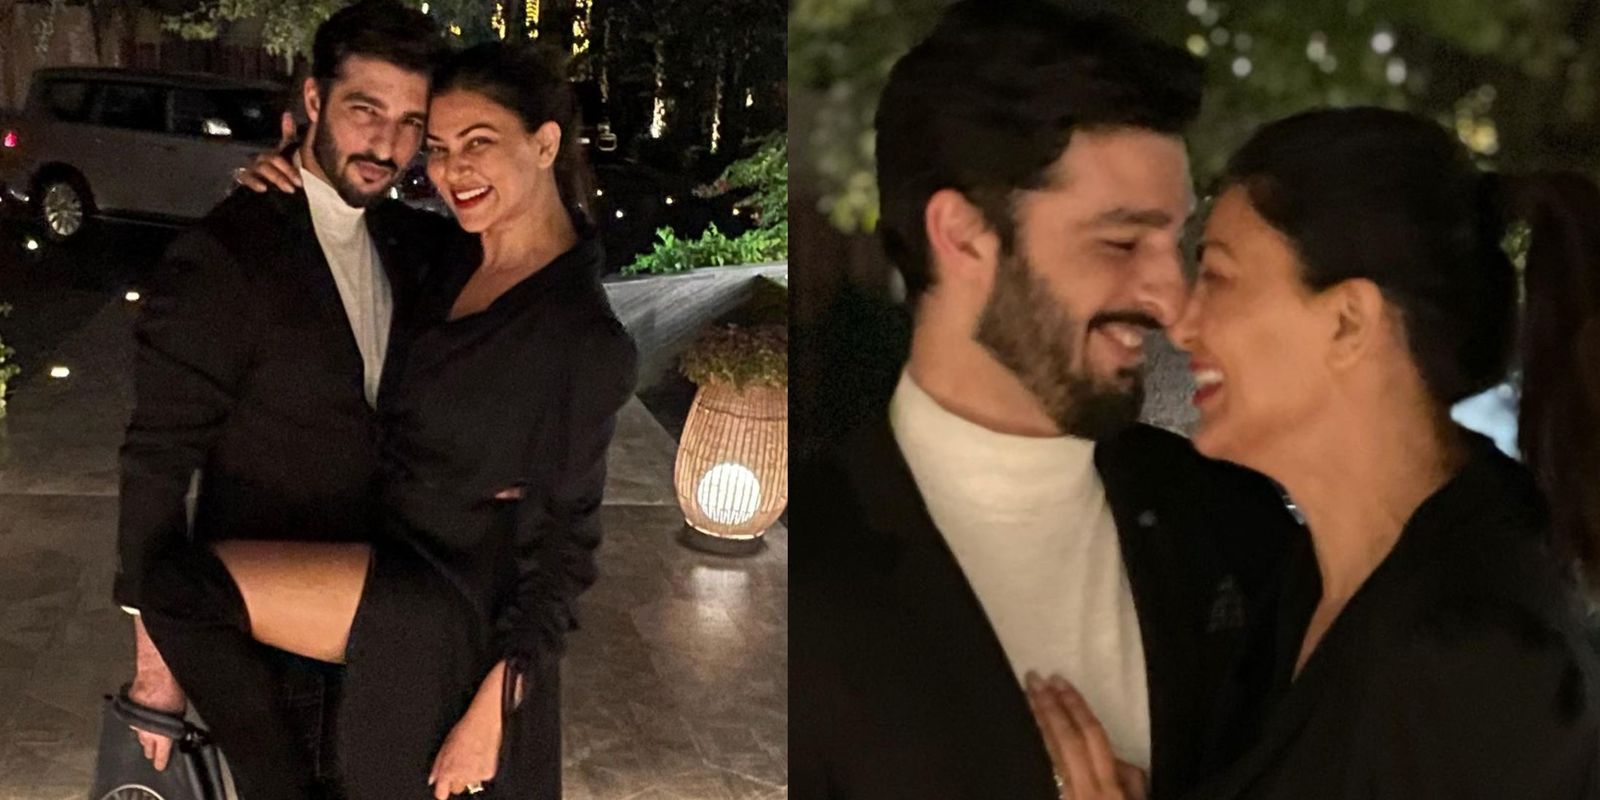 Sushmita Sen Shares Loved Up Post On Boyfriend Rohman Shawl’s Birthday; Says ‘To Know You Is To Love You’